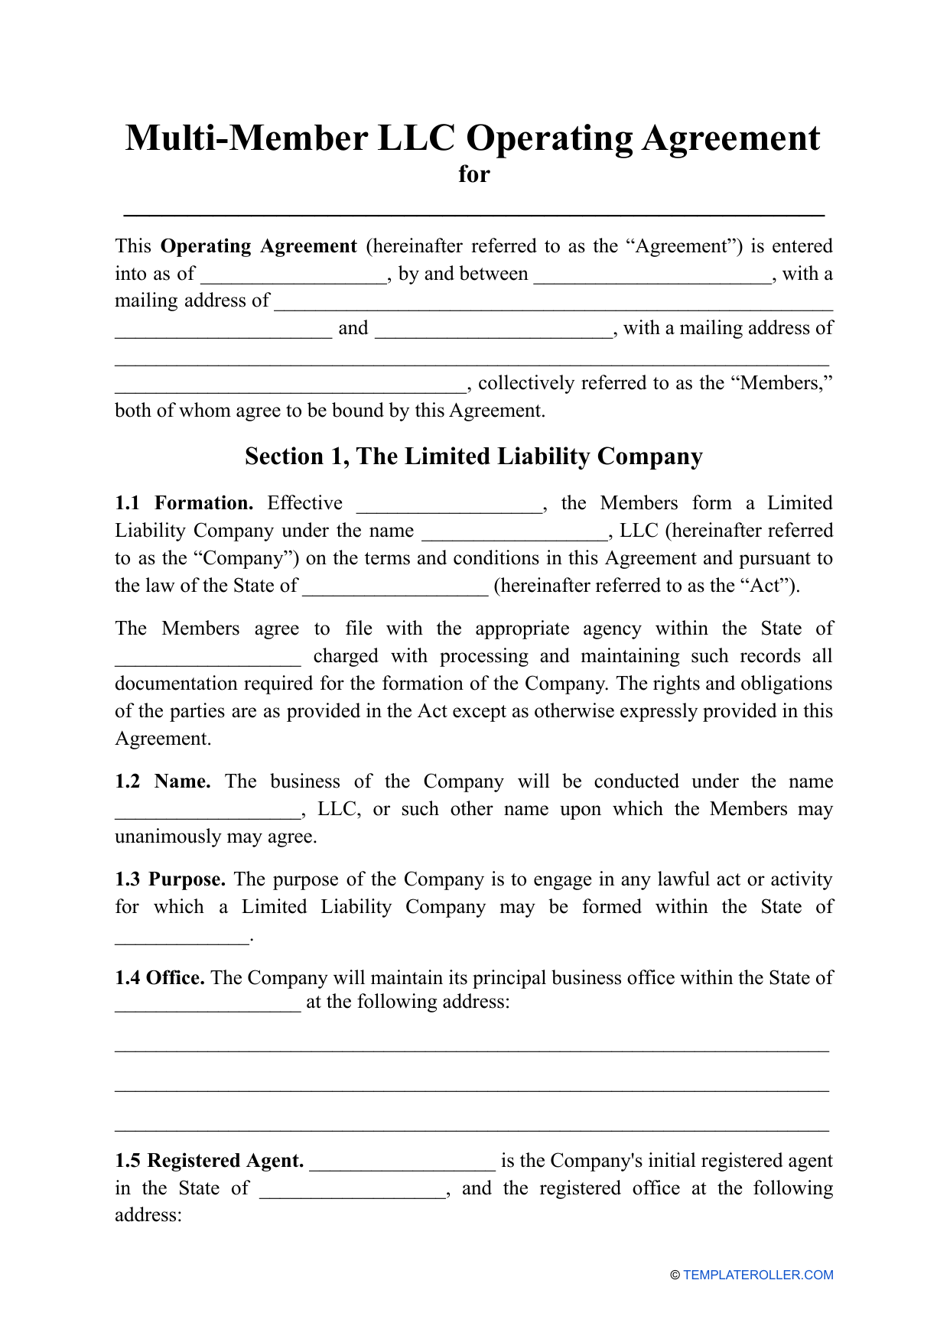 Multi-Member LLC Operating Agreement Template, Page 1